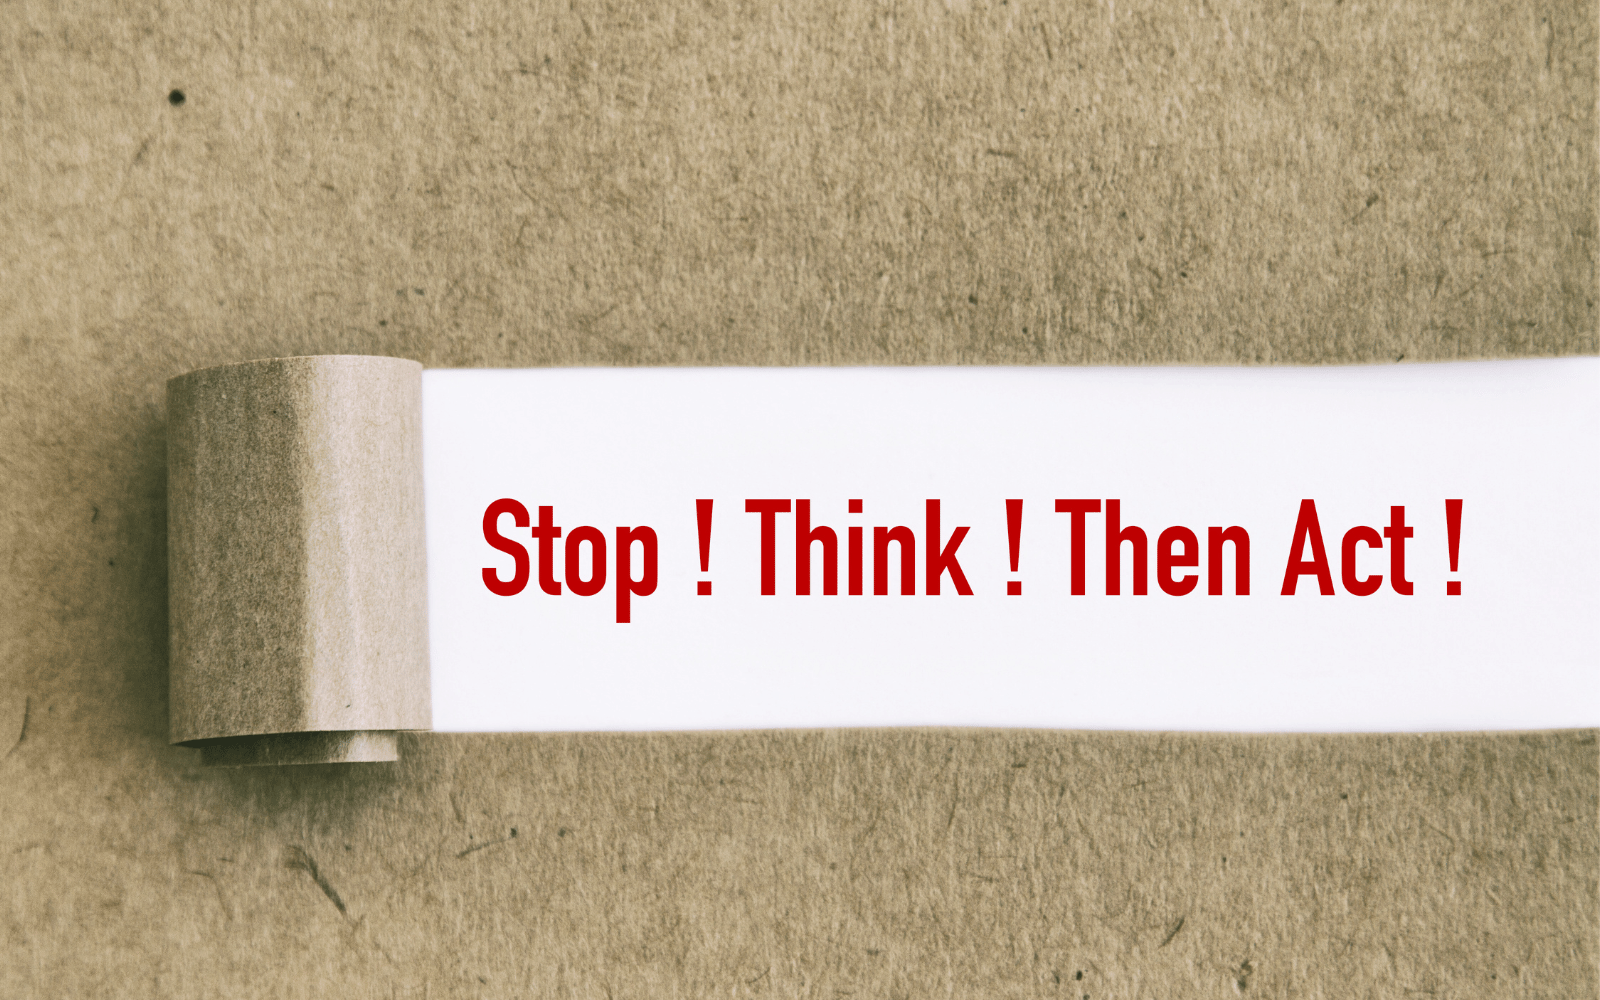 Stop, think, then act.